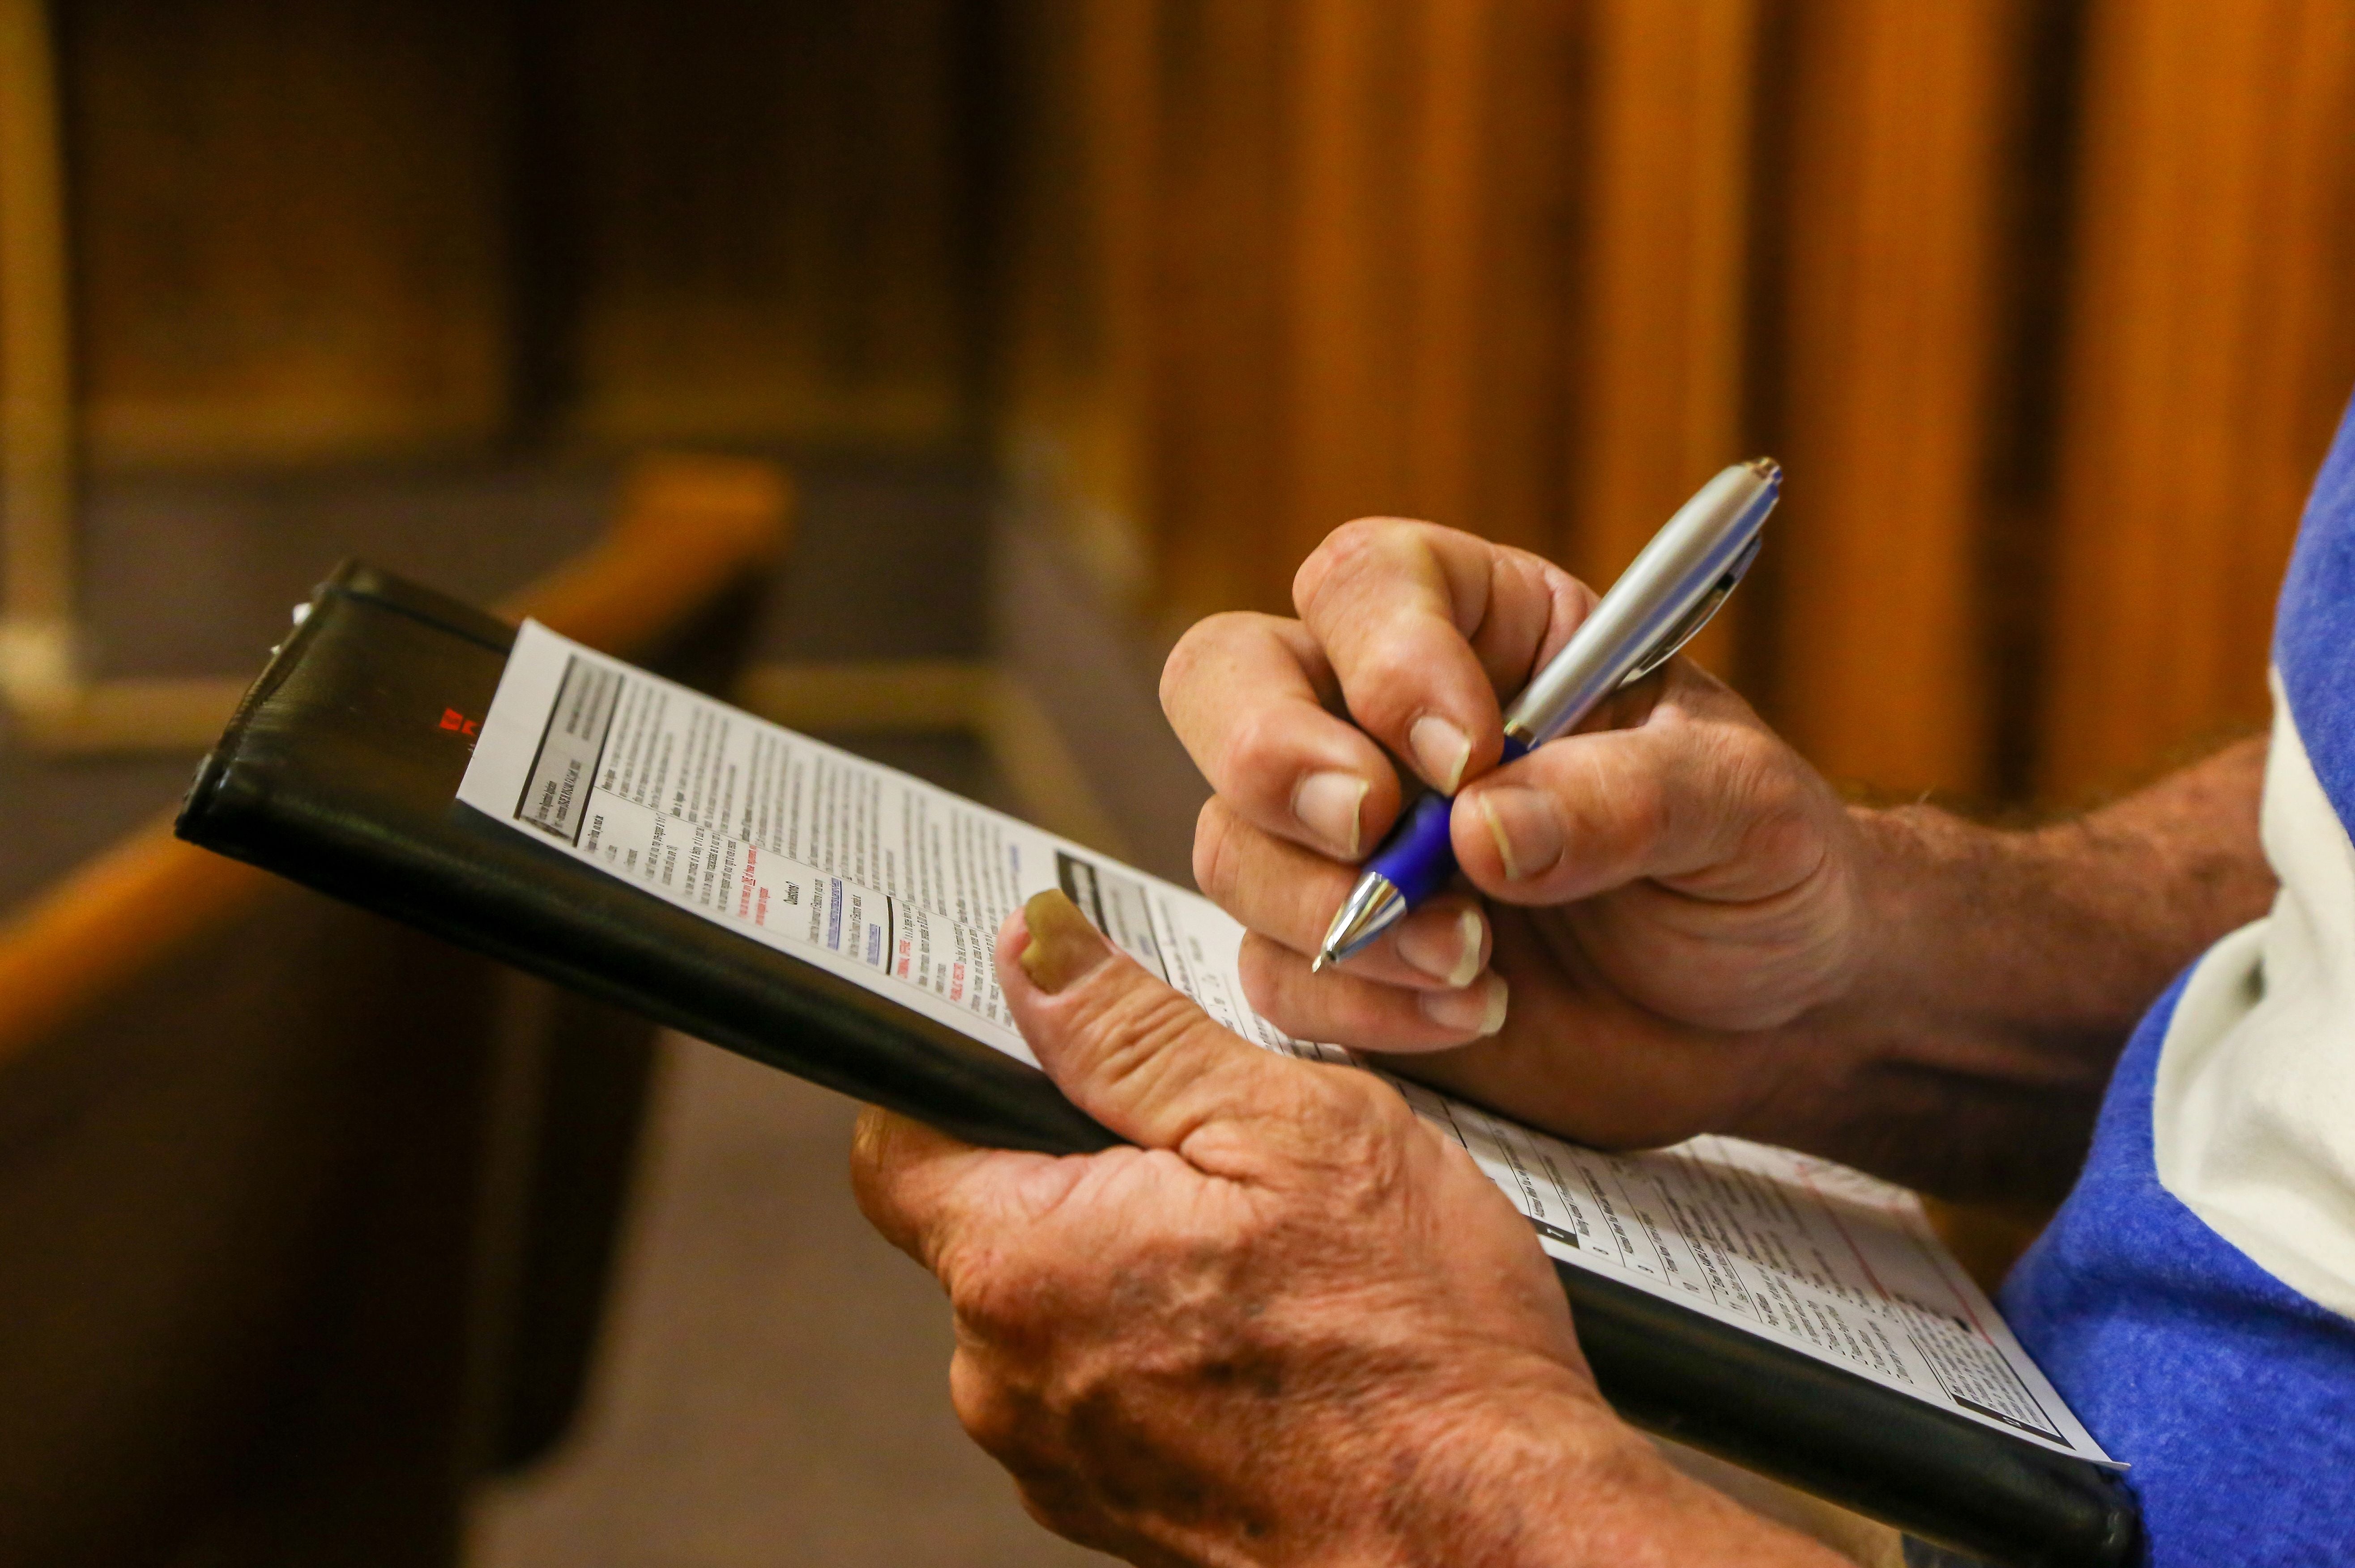 Francisco Jimenez, 60, registers to vote following a special court hearing aimed at restoring the right to vote under Florida's amendment 4 in a Miami-Dade County courtroom on November 8, 2019, in Miami, Florida